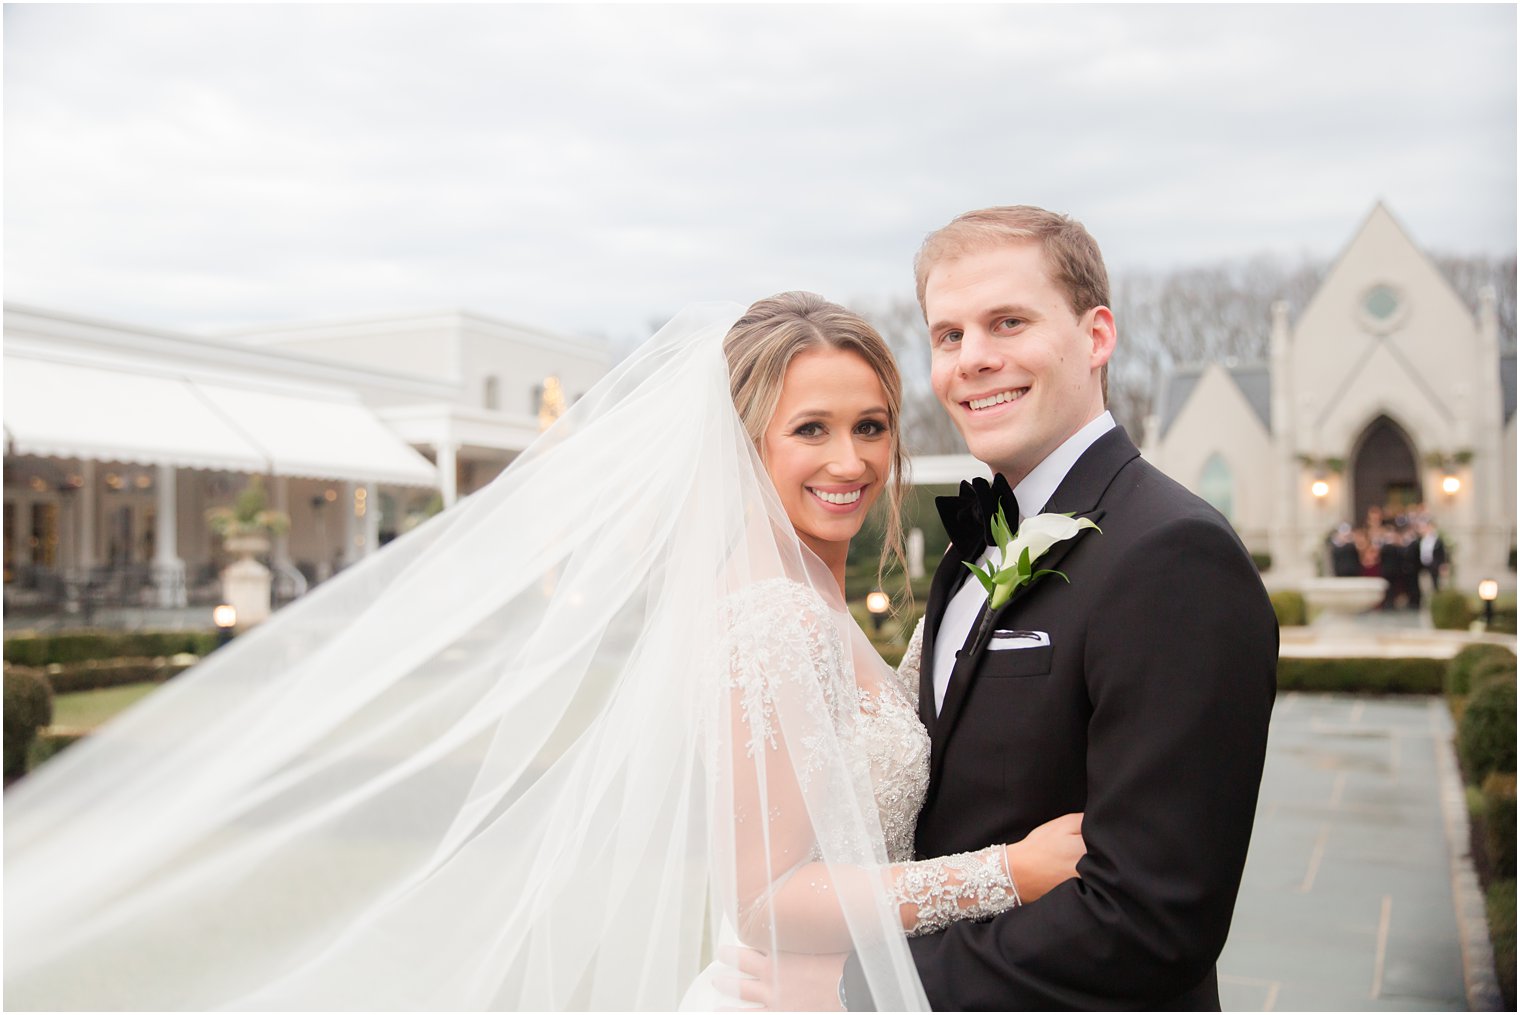 Bride and groom at Winter wedding at Park Chateau Estate and Gardens